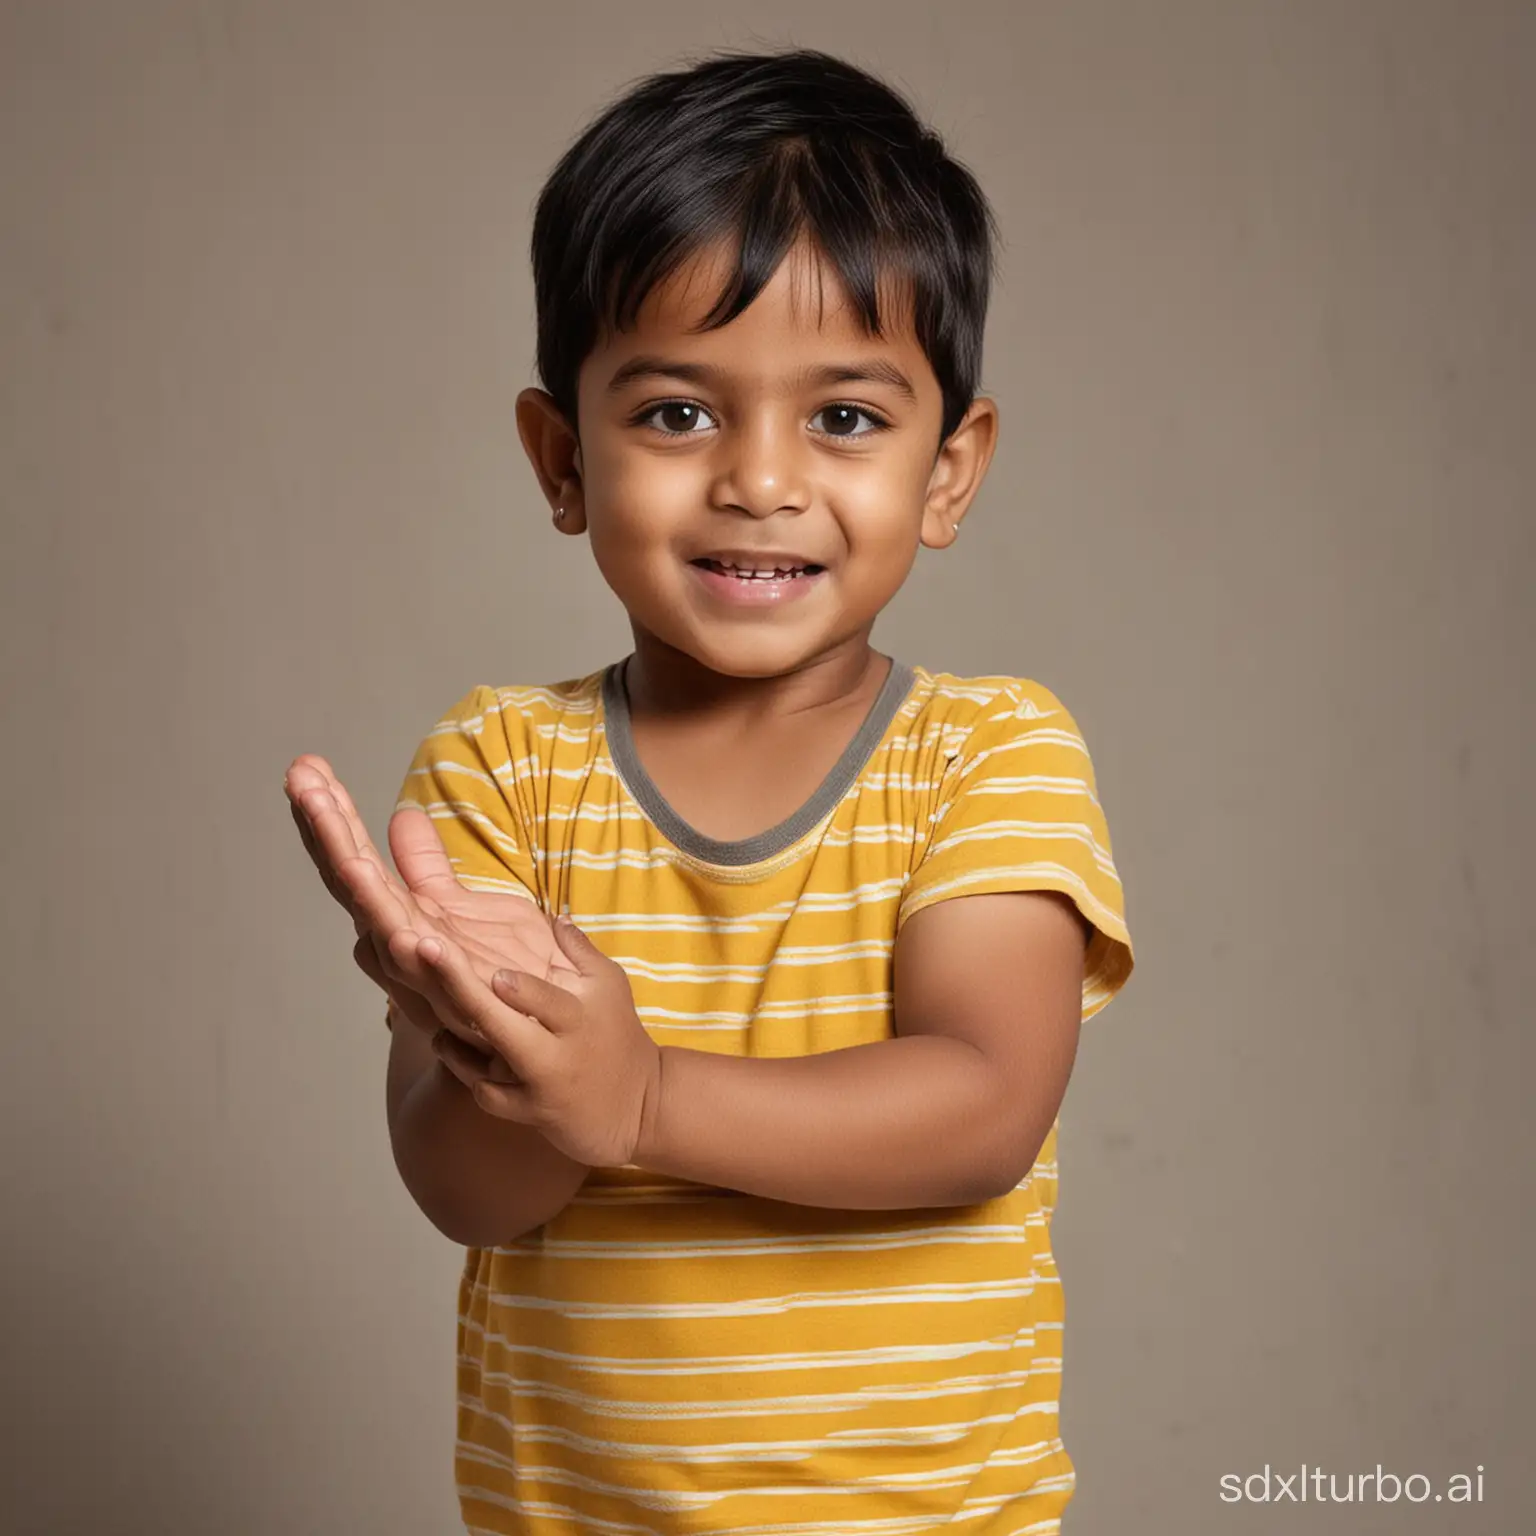 a small 4 years old indian boy
pumching his hands
